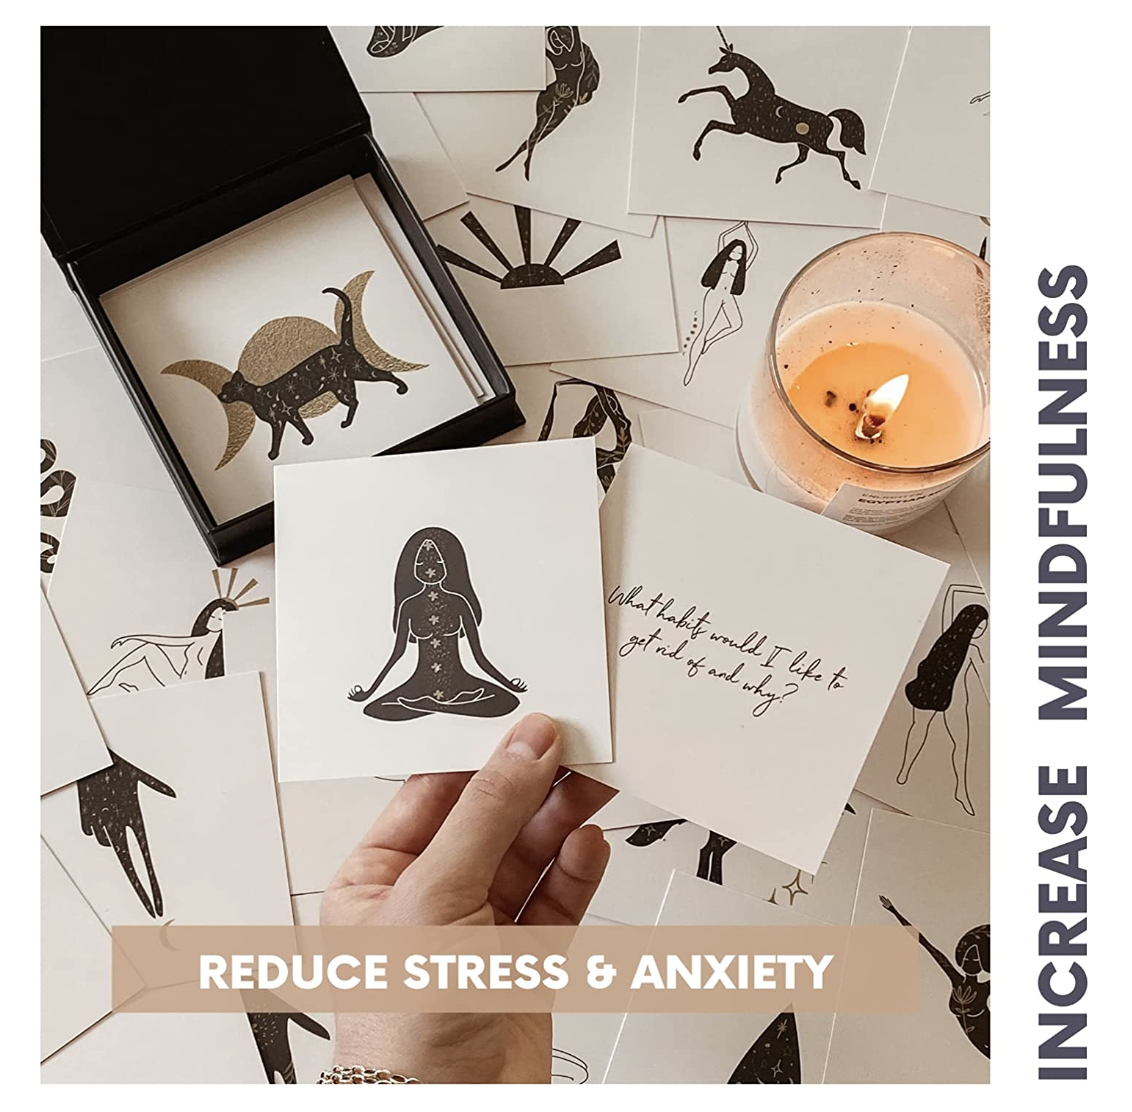 Meditation and Mindfulness Cards I Self Reflection, Anxiety and Stress Relief Questions Kit & Accessories